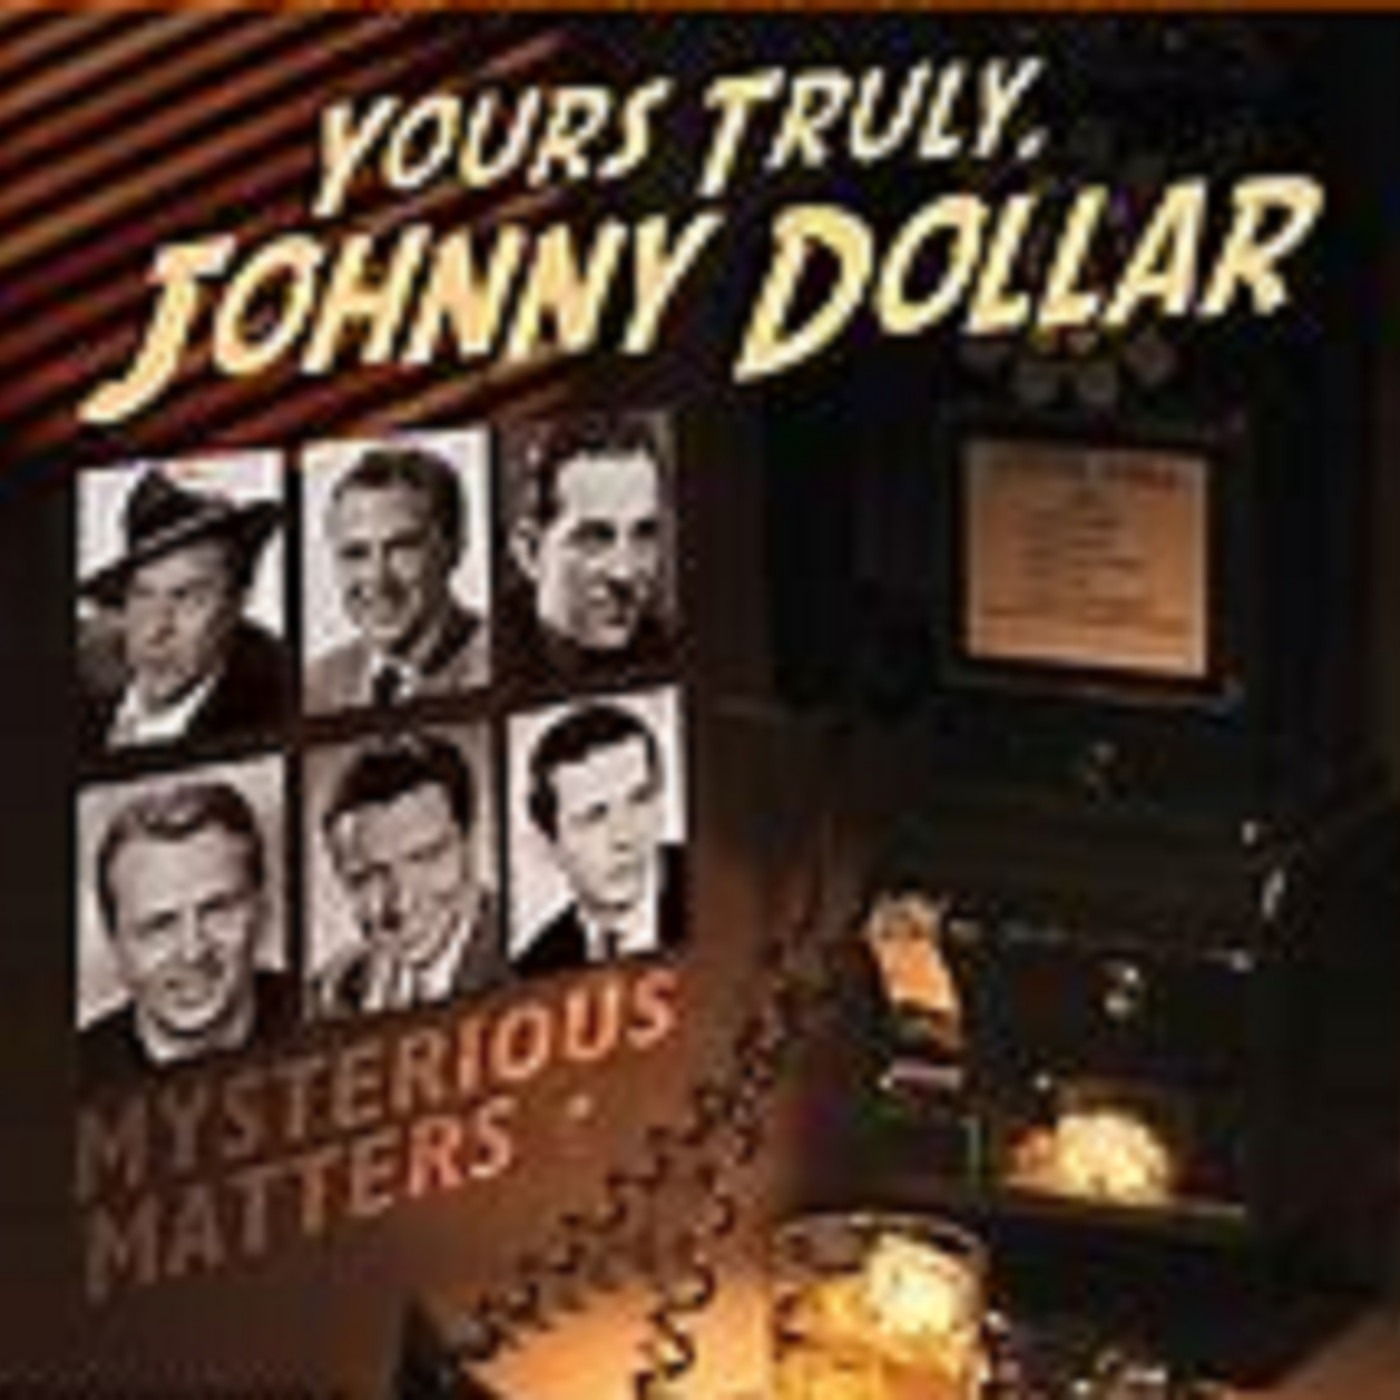 Yours Truly, Johnny Dollar - 092362, episode 810 - The Deadly Crystal Matter